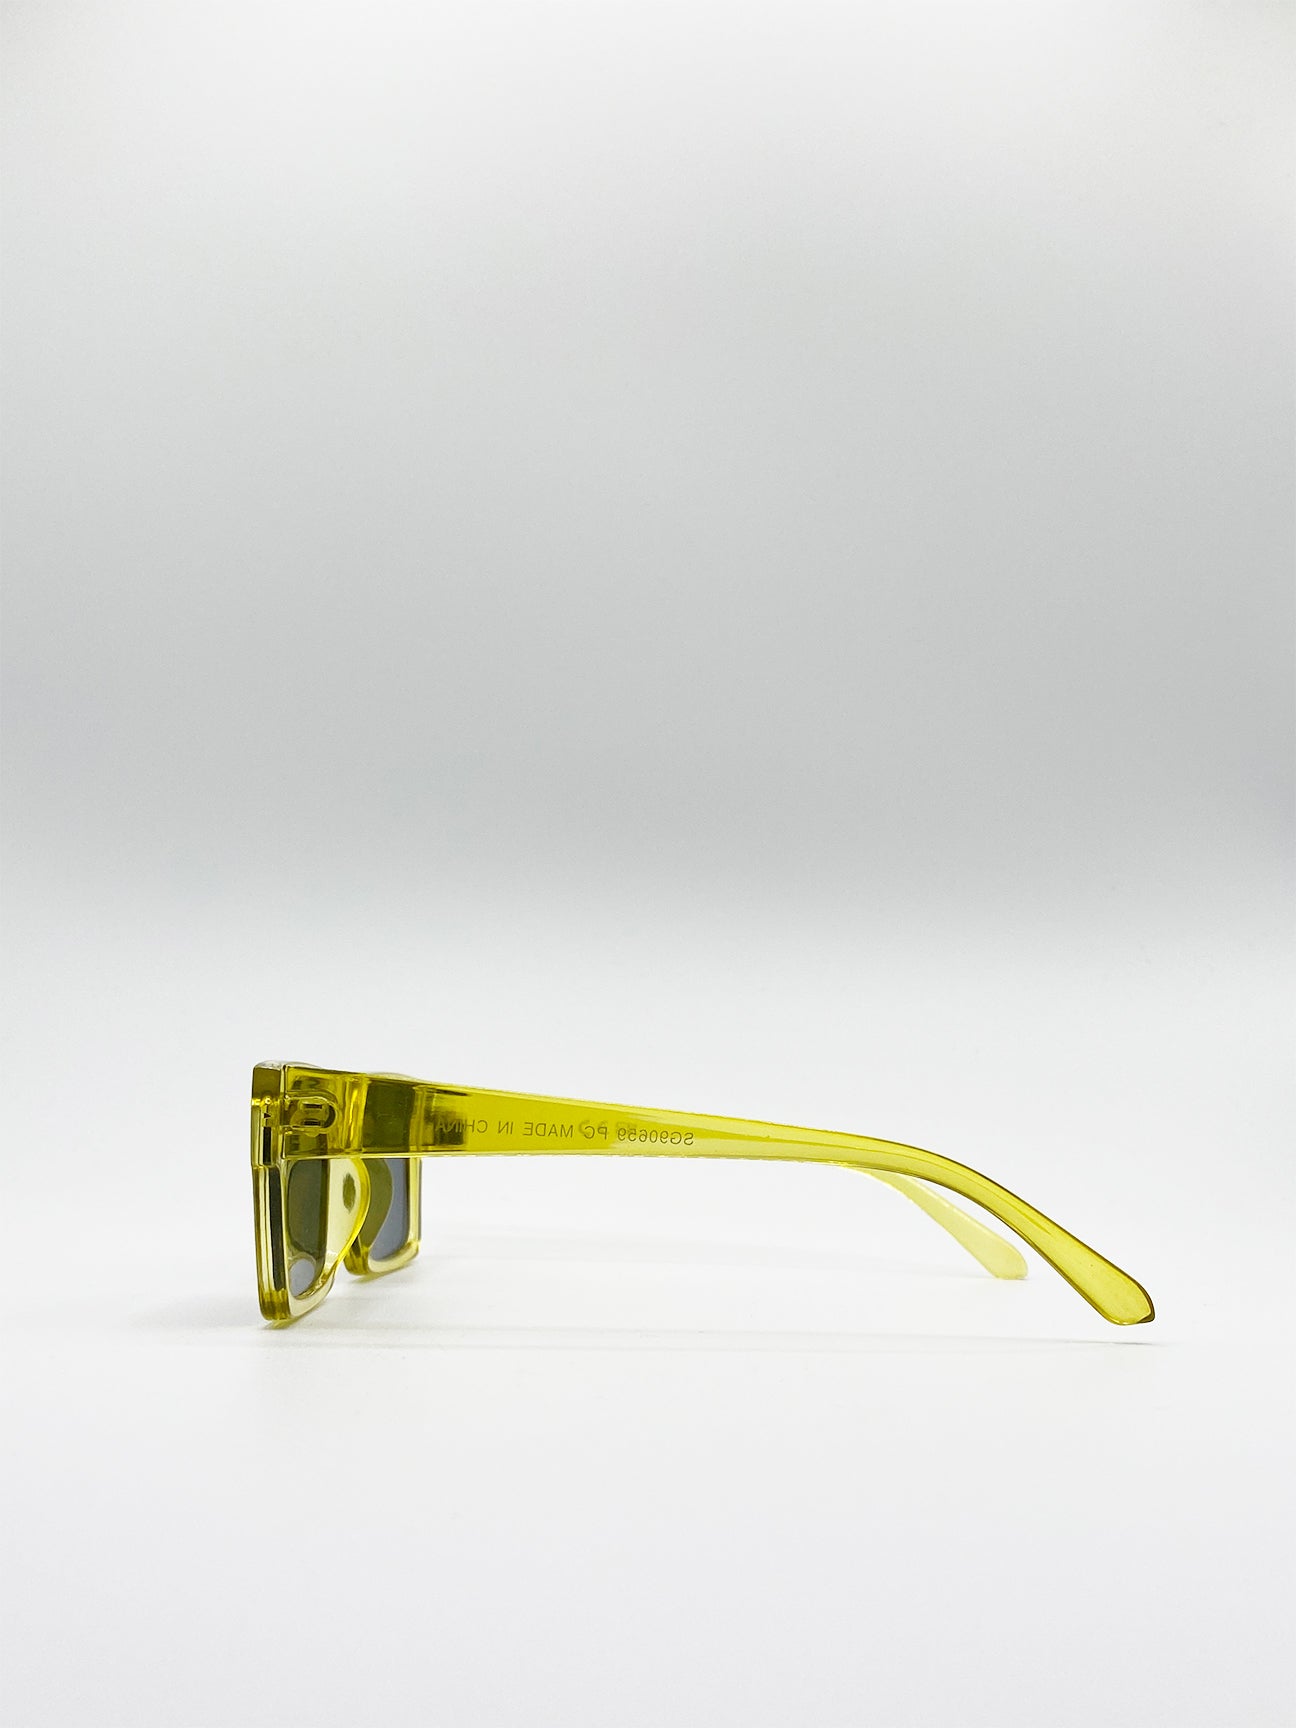 Square Sunglasses In Crystal Yellow